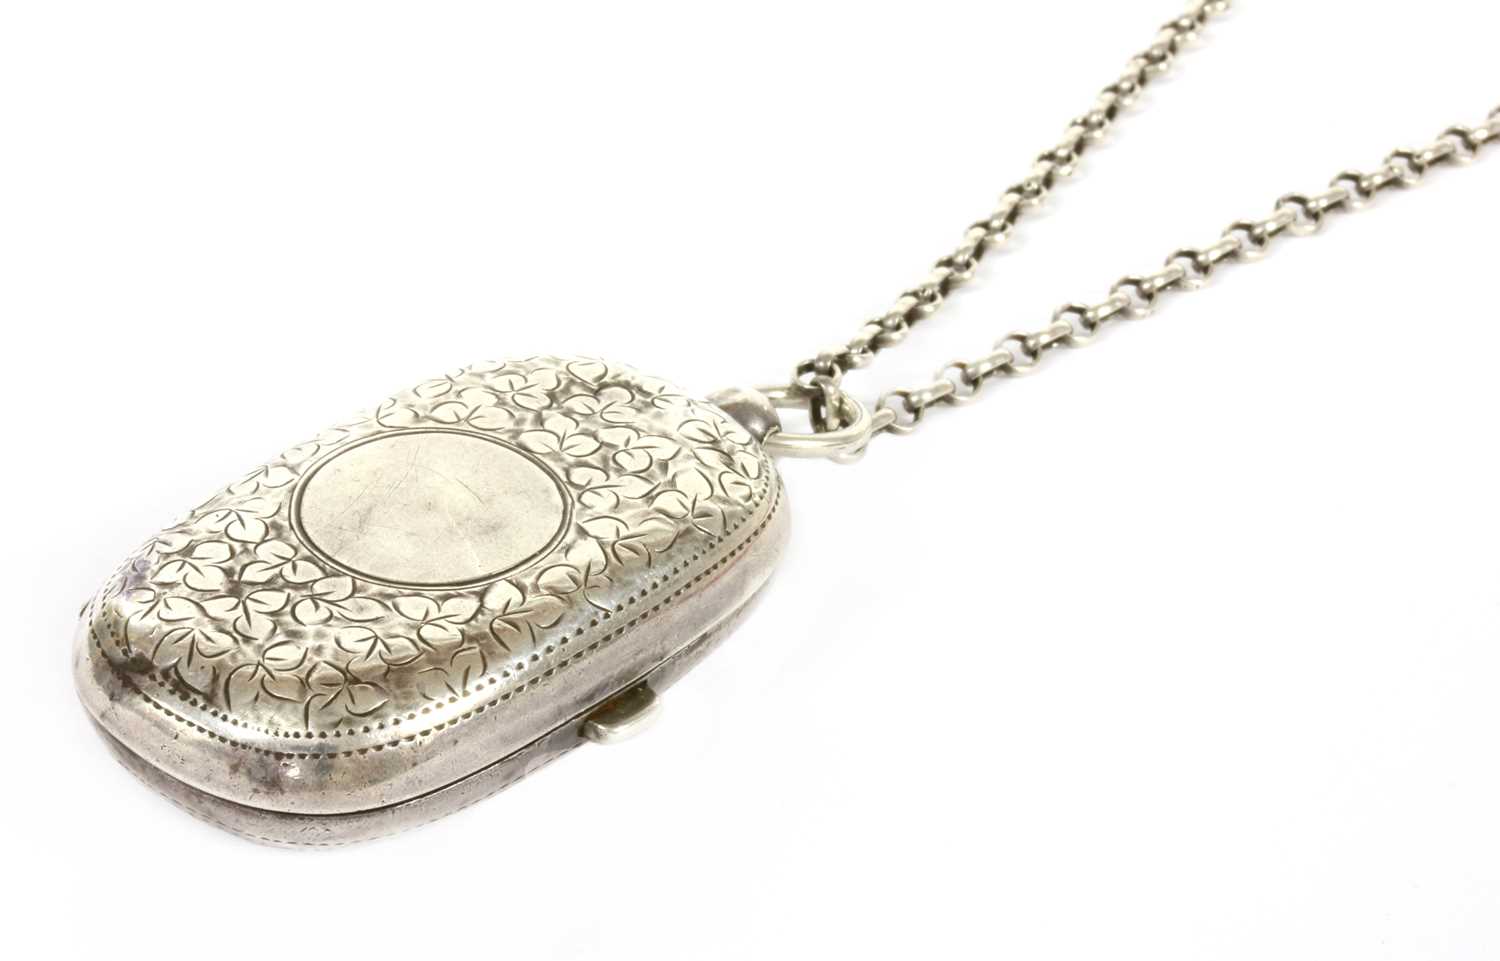 Lot 45 - An Edwardian sterling silver twin section sovereign case